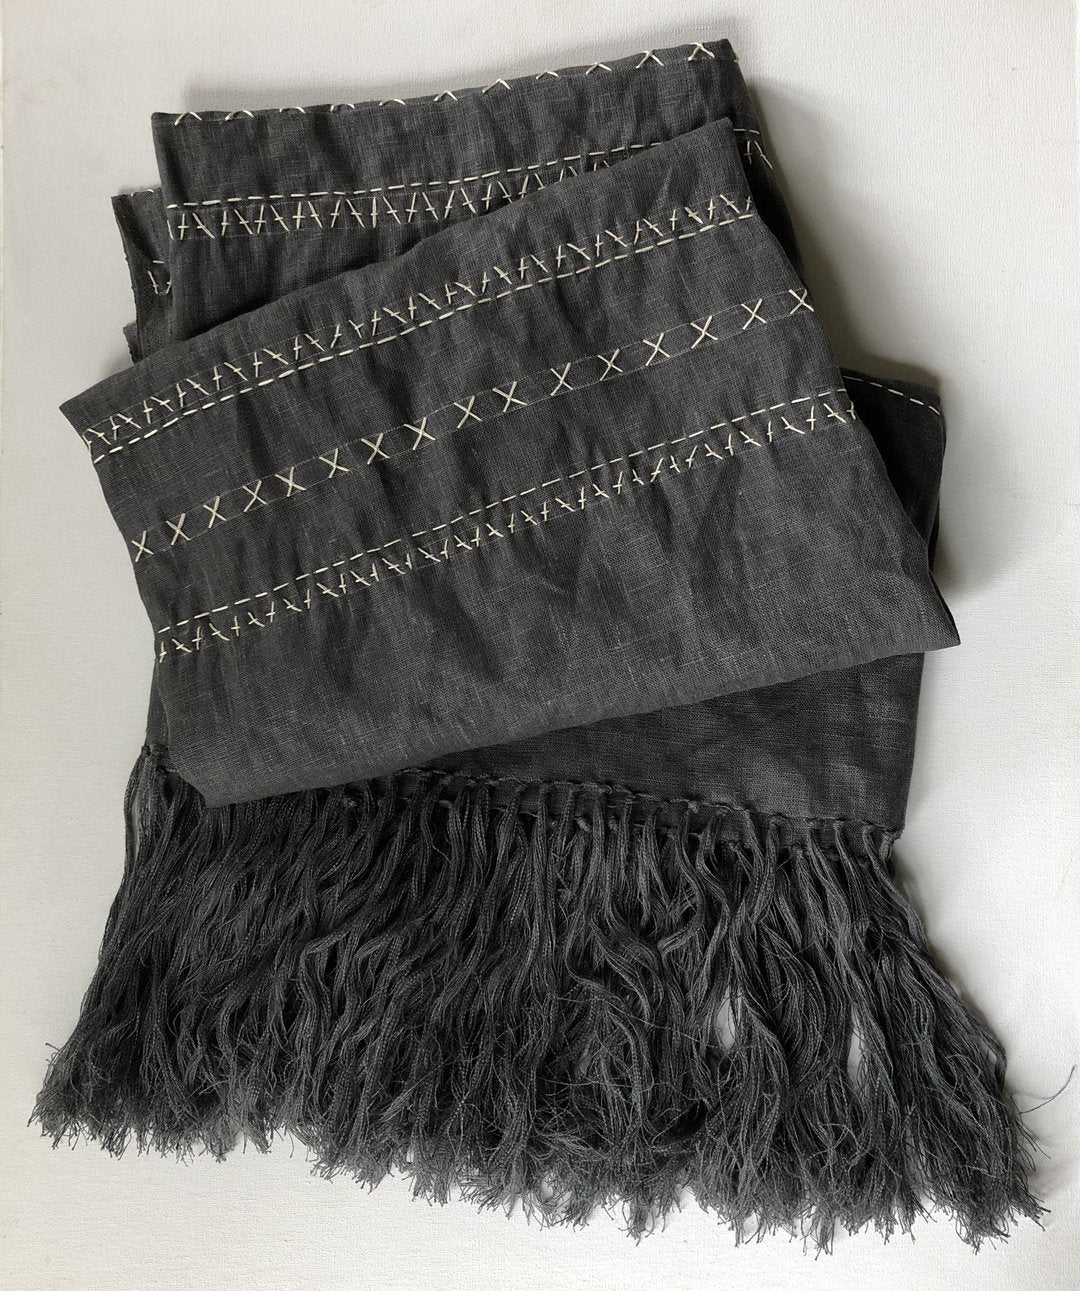 Decor_Throws_Embroidered_Handmade_Linen_Charcoal